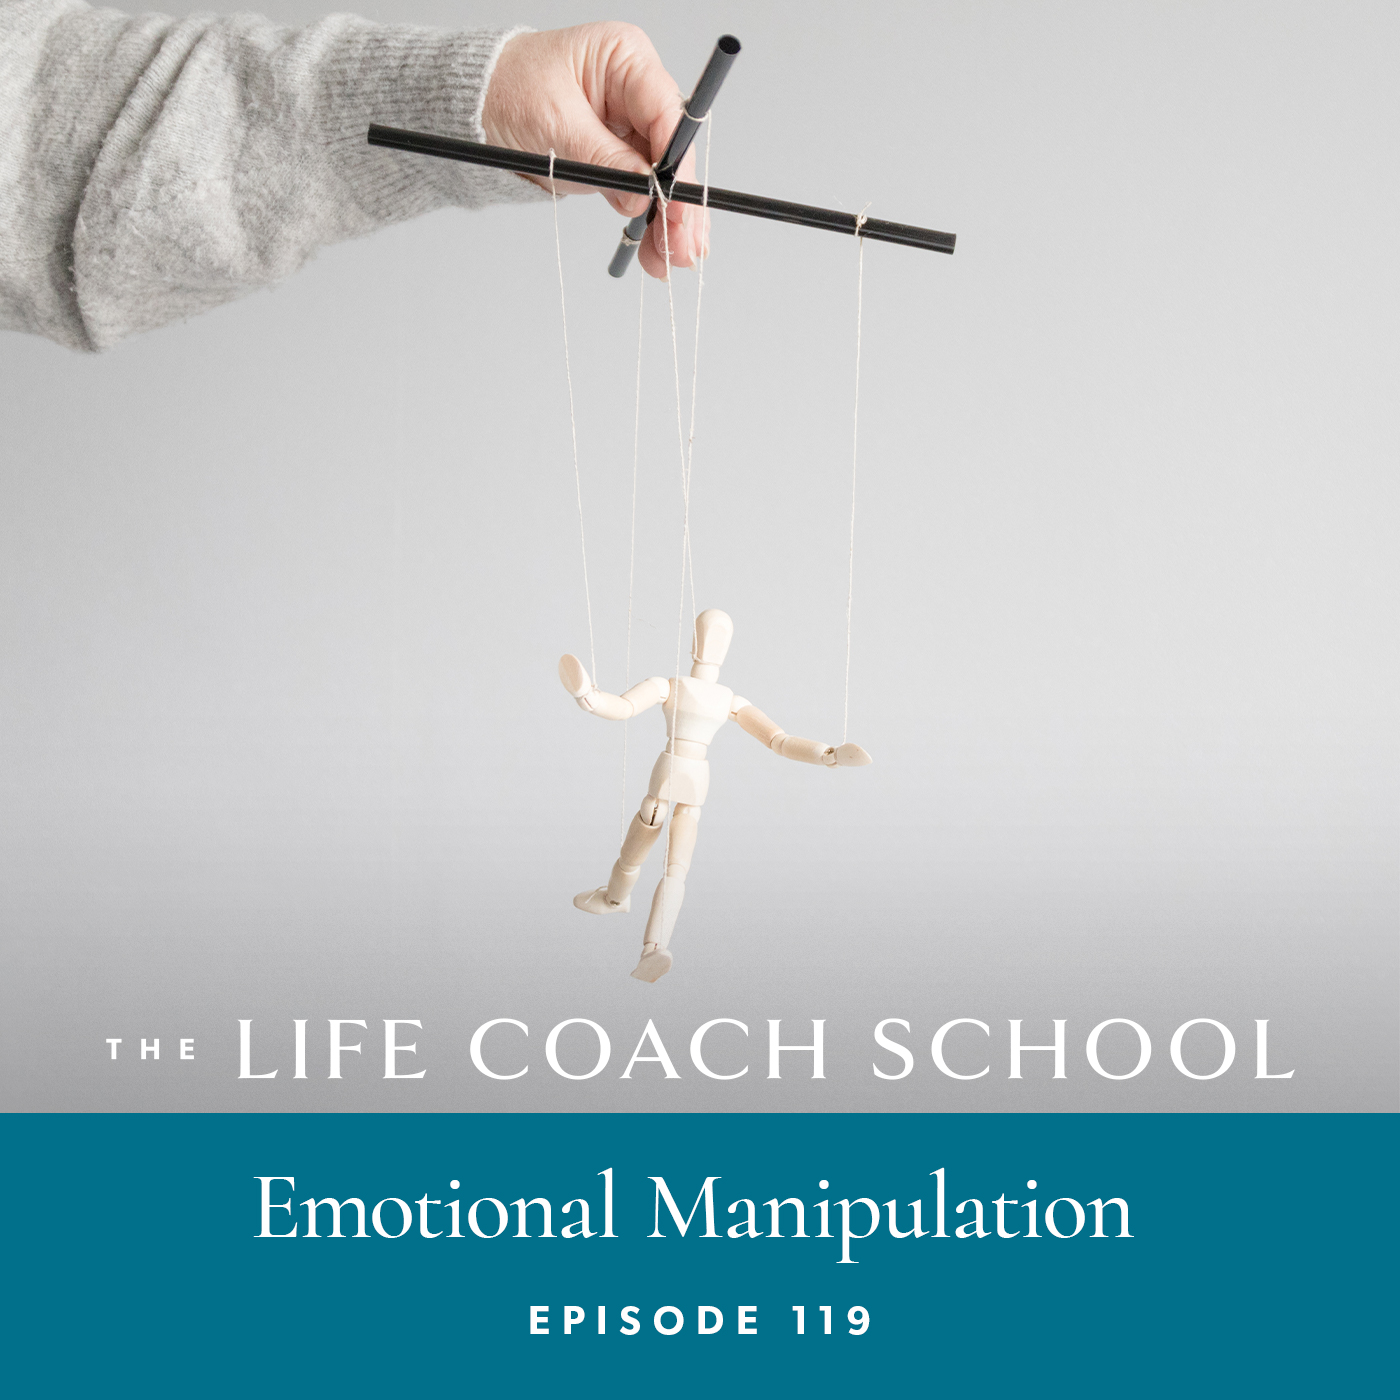 The Life Coach School Podcast with Brooke Castillo | Episode 119 | Emotional Manipulation